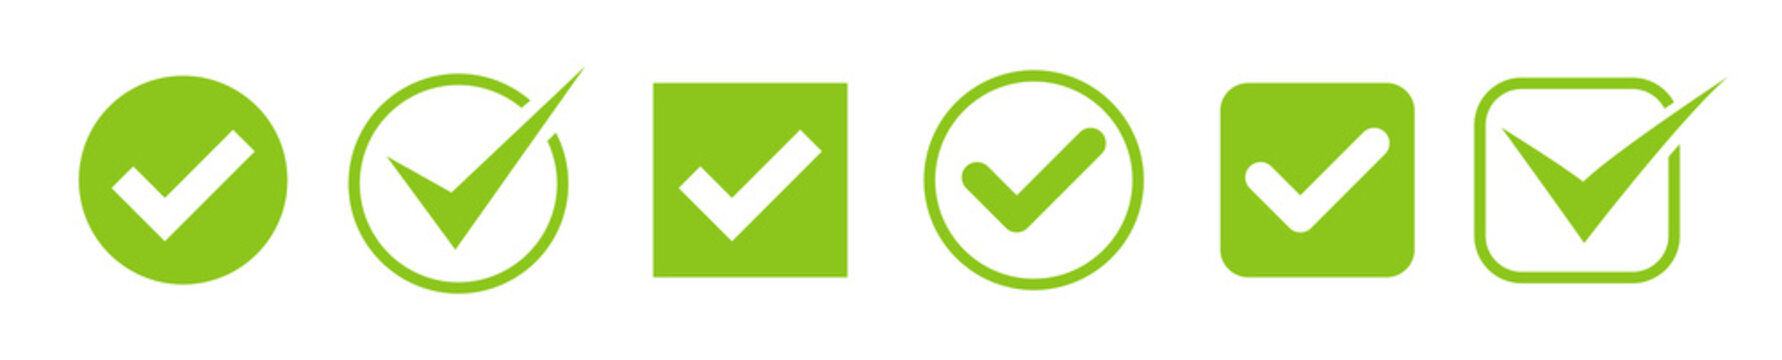 Set of green check marks icons.